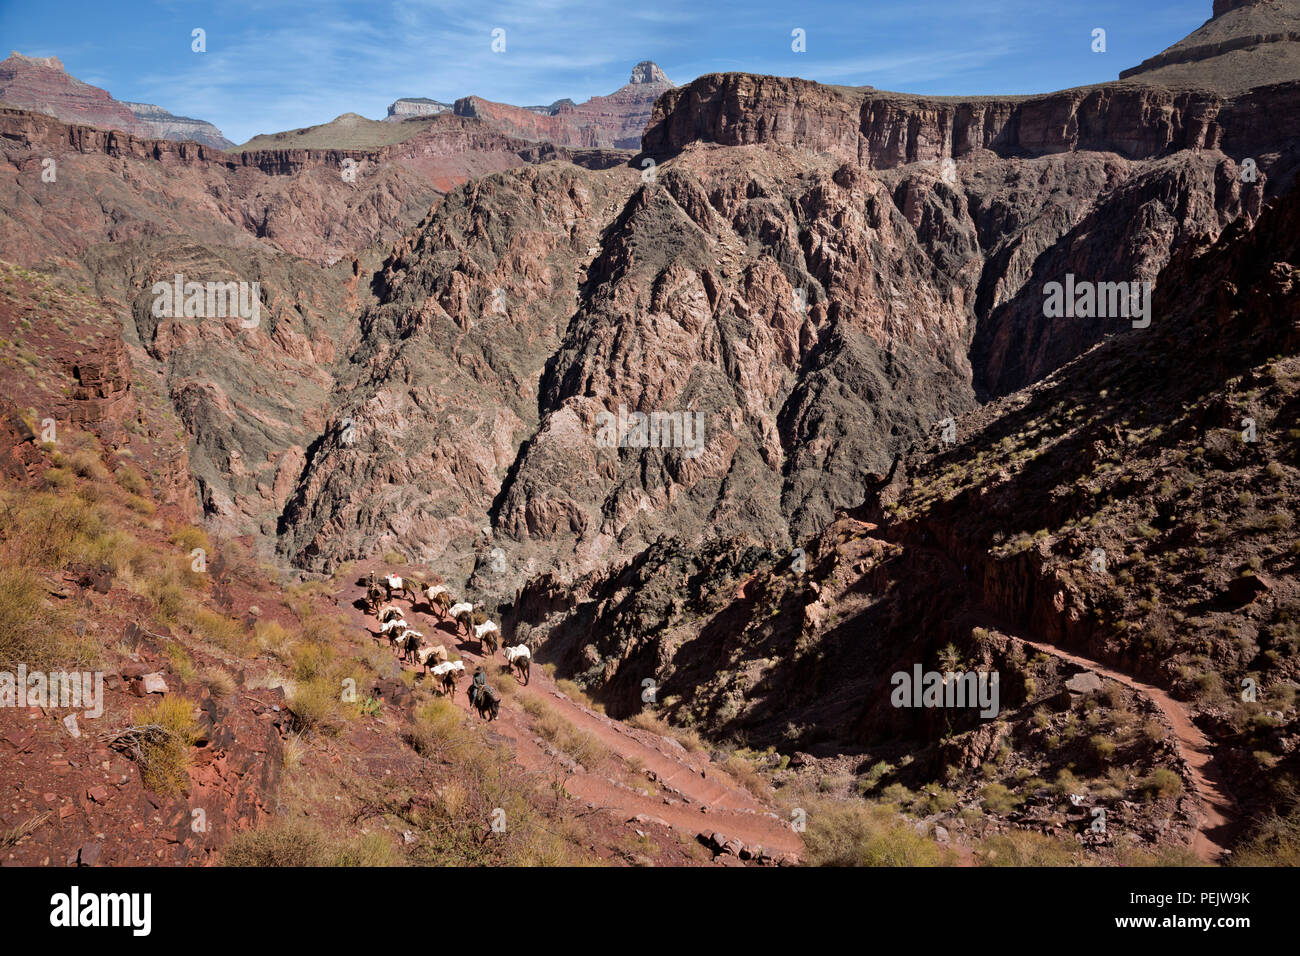 AZ00287-00...ARIZONA - A loaded pack train of mules ascending the South Kaibab Trail below The Tipoff restarea in Grand Canyon National Park. Stock Photo